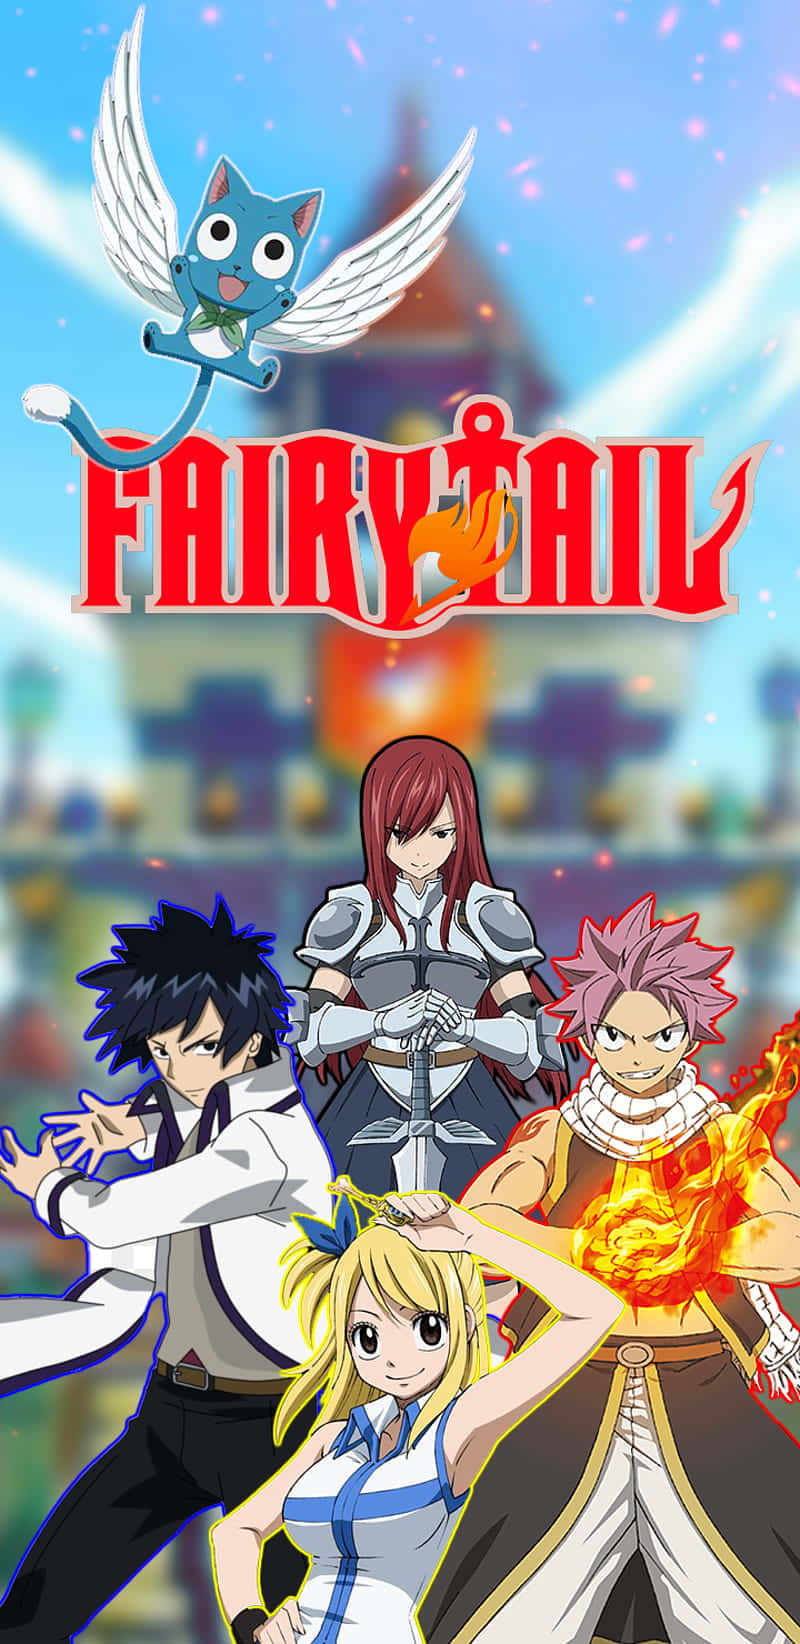 Join the Fairy Tail guild and go on magical adventures!